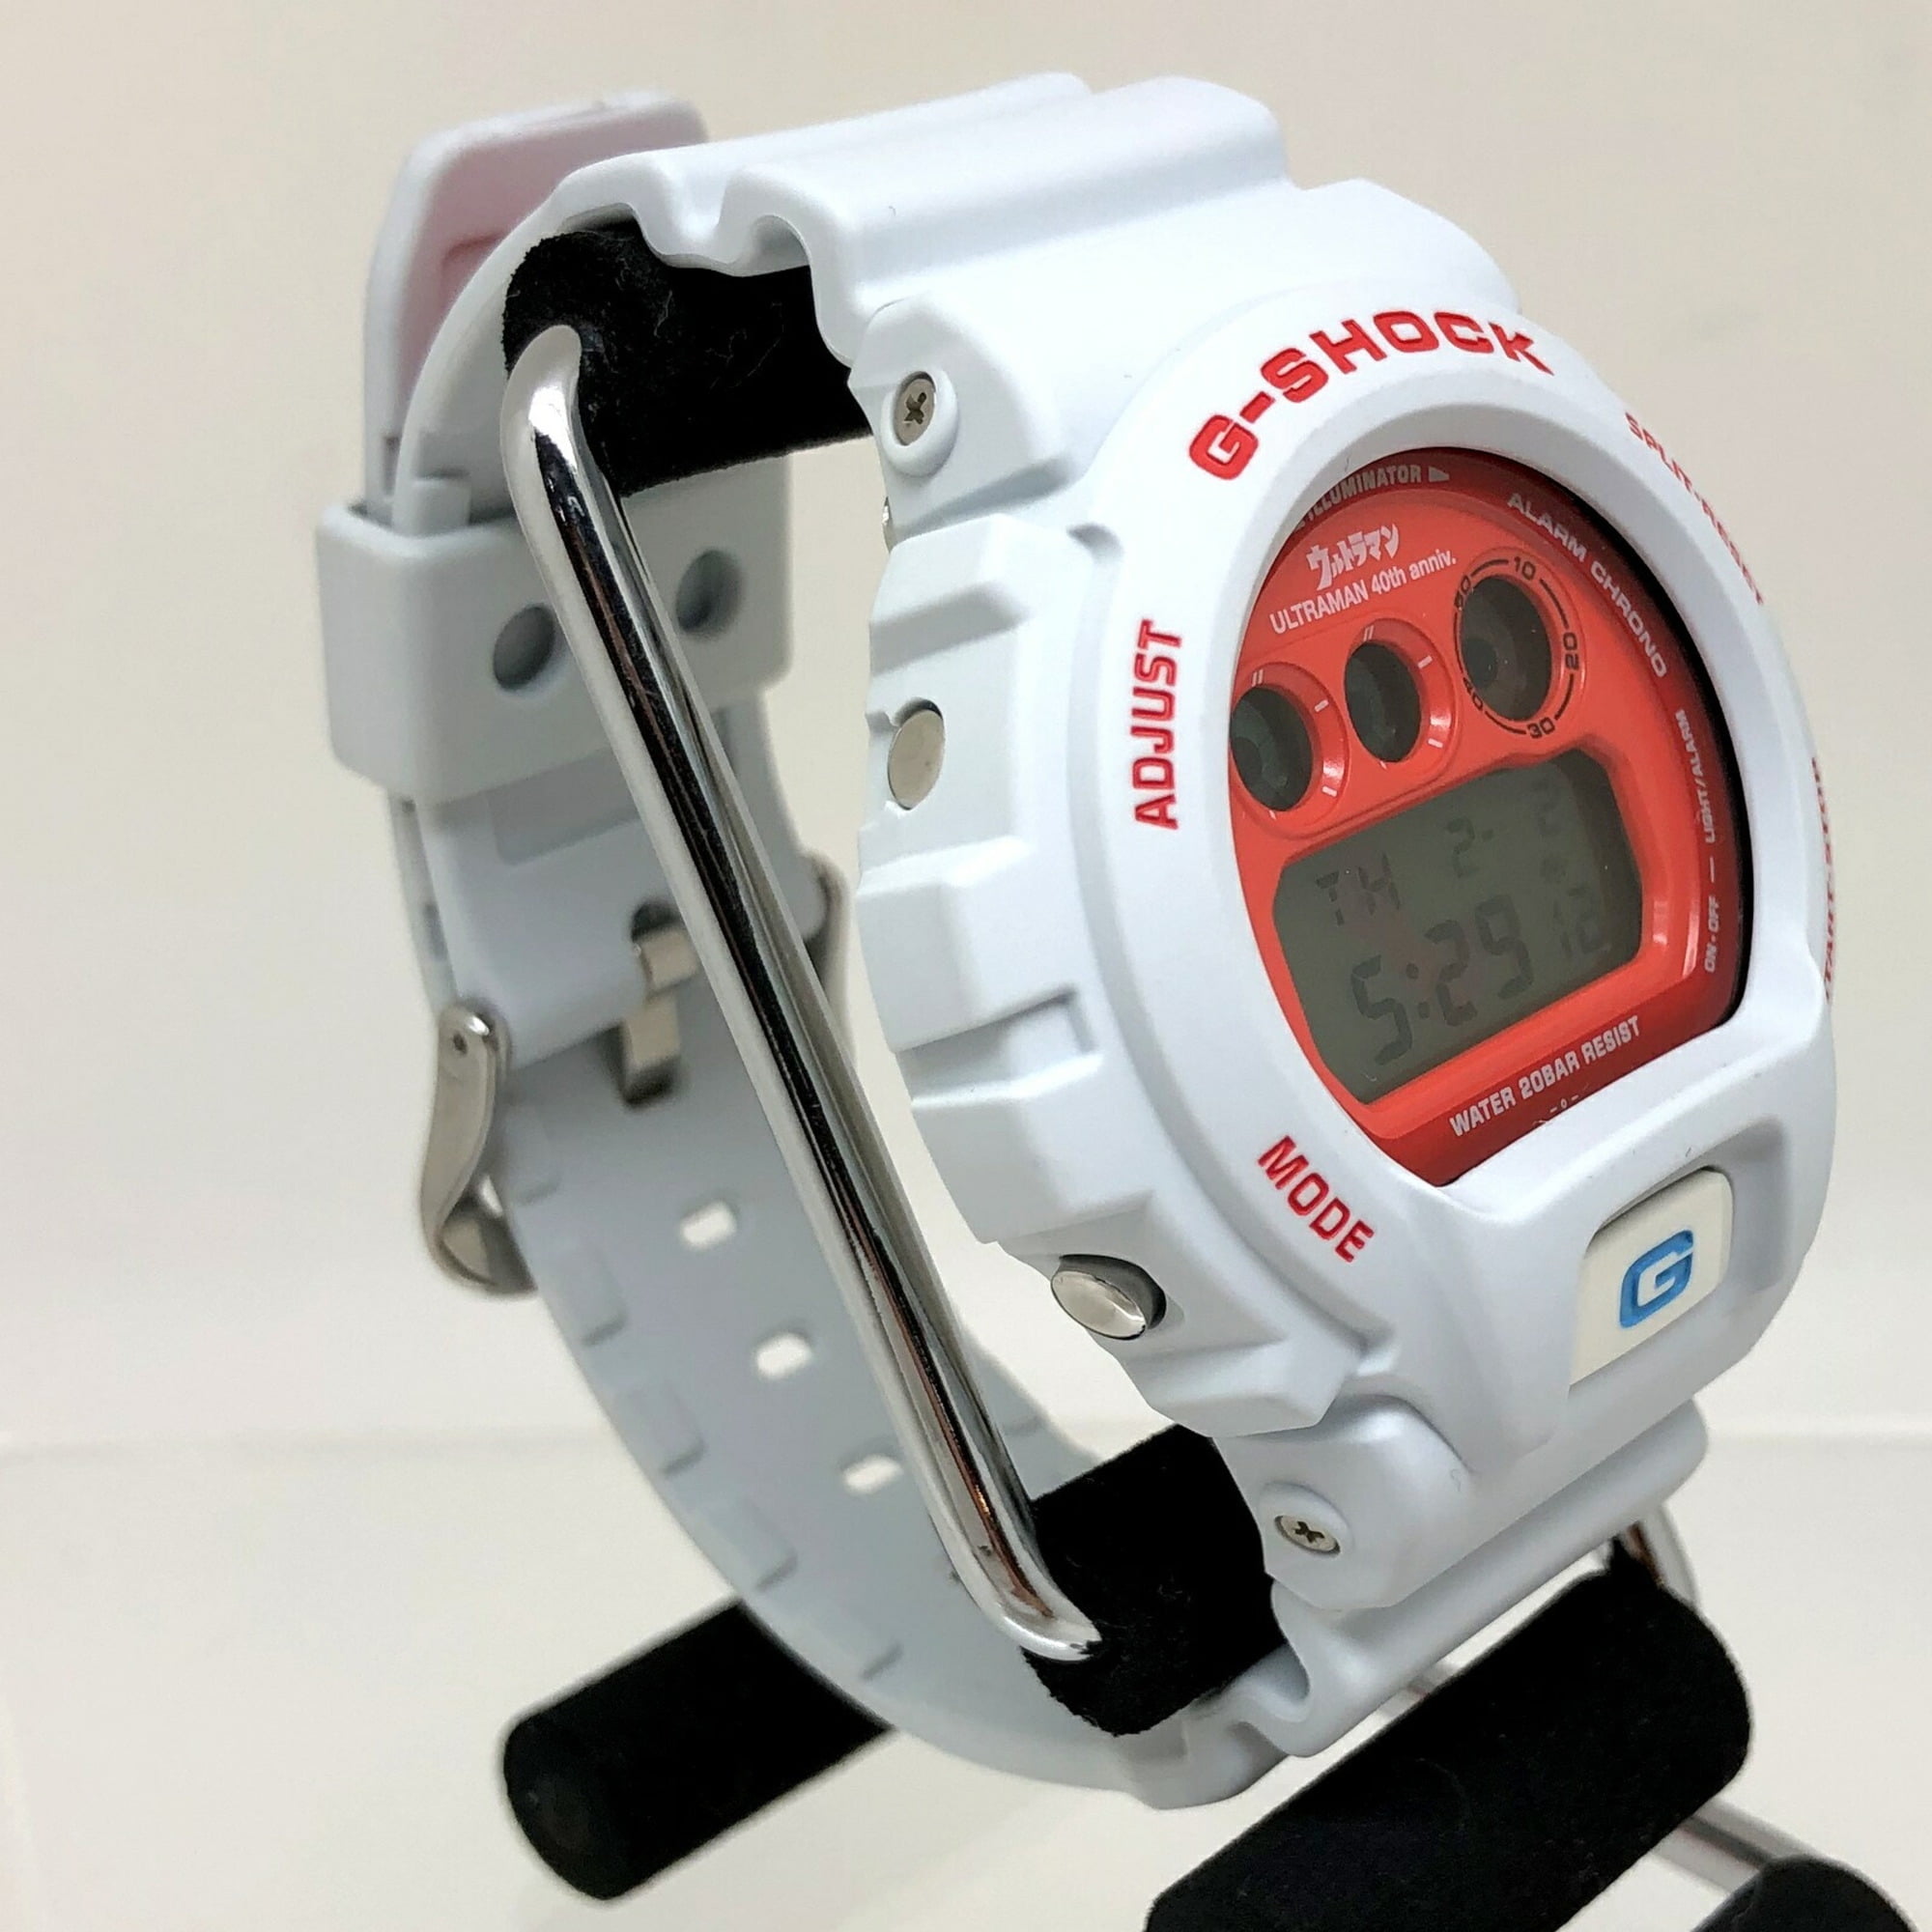 Authenticated Used G-SHOCK G-shock CASIO Casio watch DW-6900FS Ultraman  series birth 40th anniversary 40TH collaboration double name third white  gray 